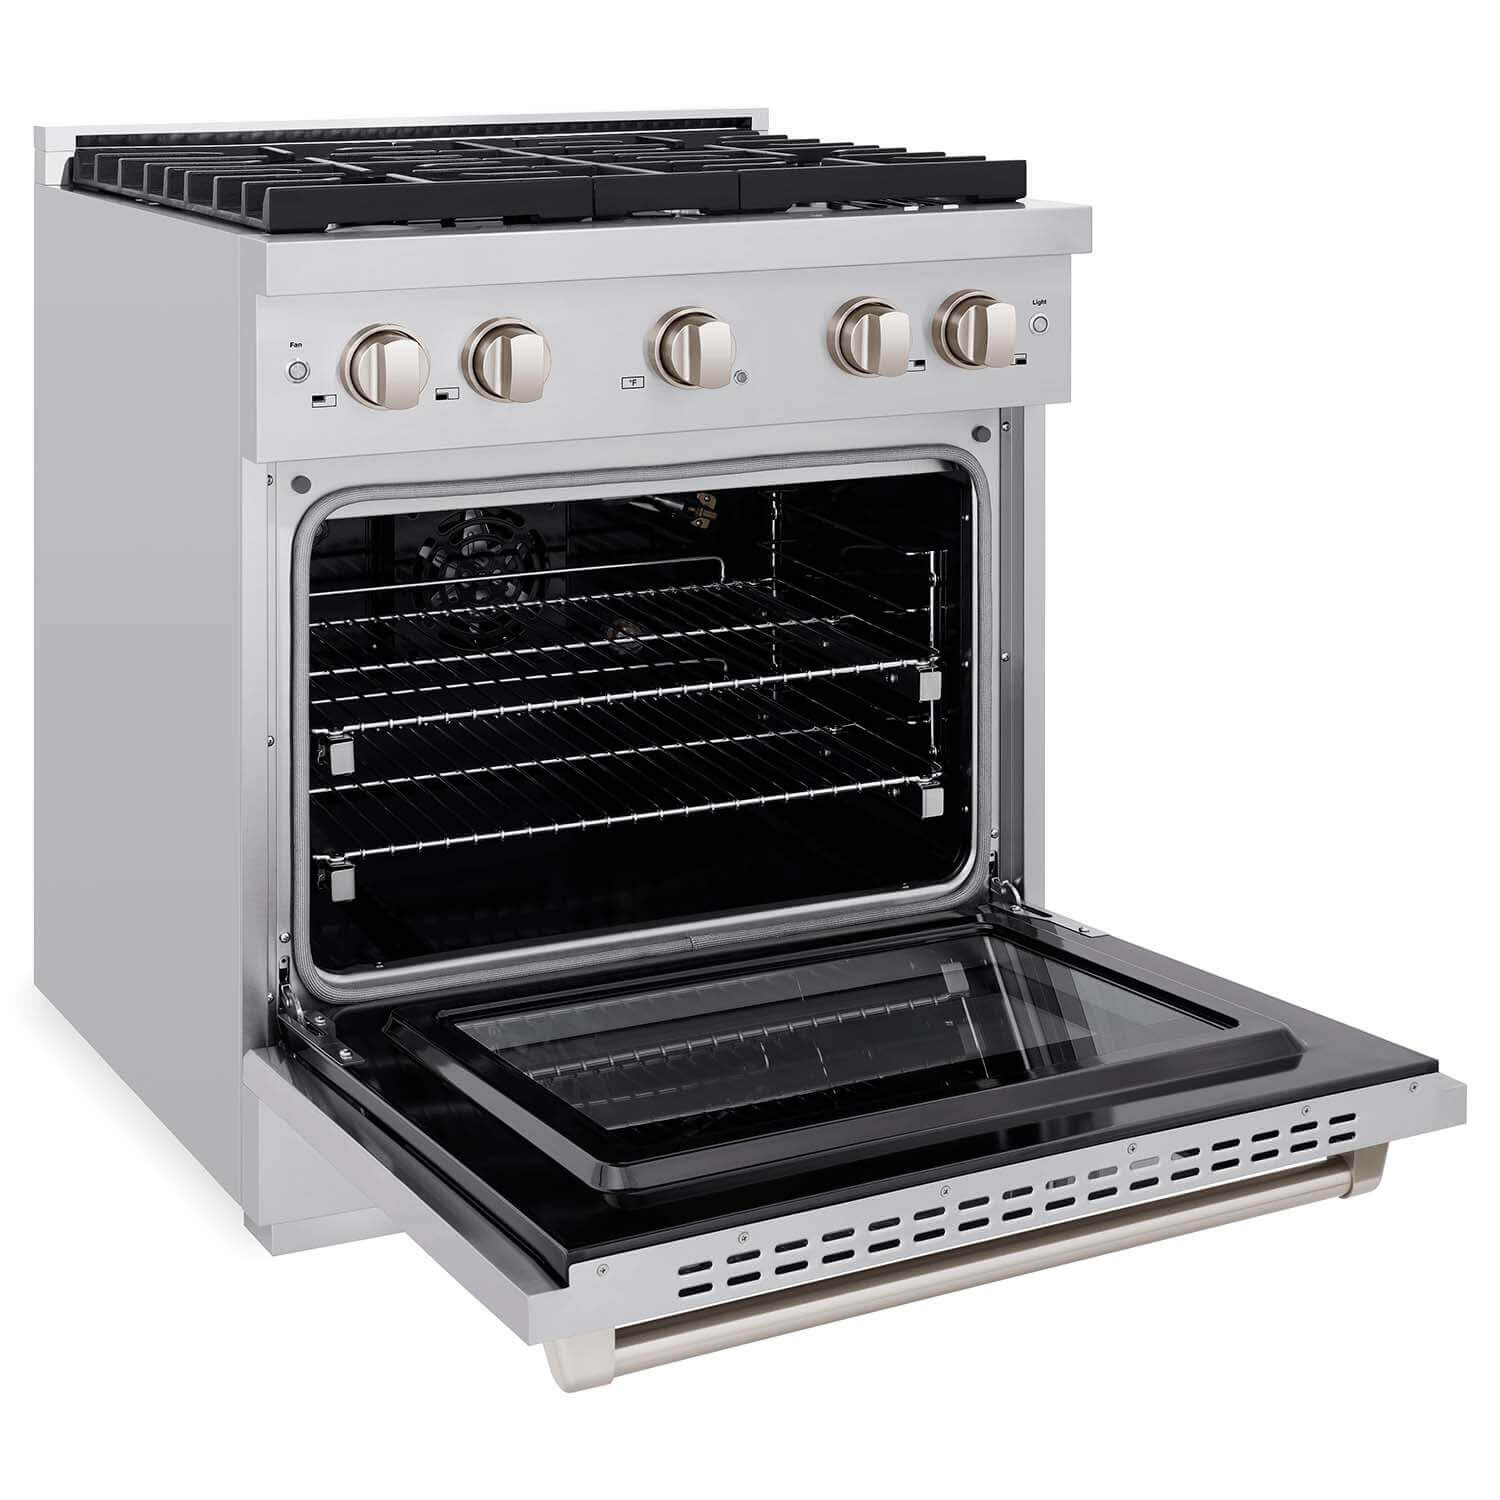 ZLINE 30 in. 4.2 cu. ft. 4 Burner Gas Range with Convection Gas Oven in Stainless Steel (SGR30) side, oven open.